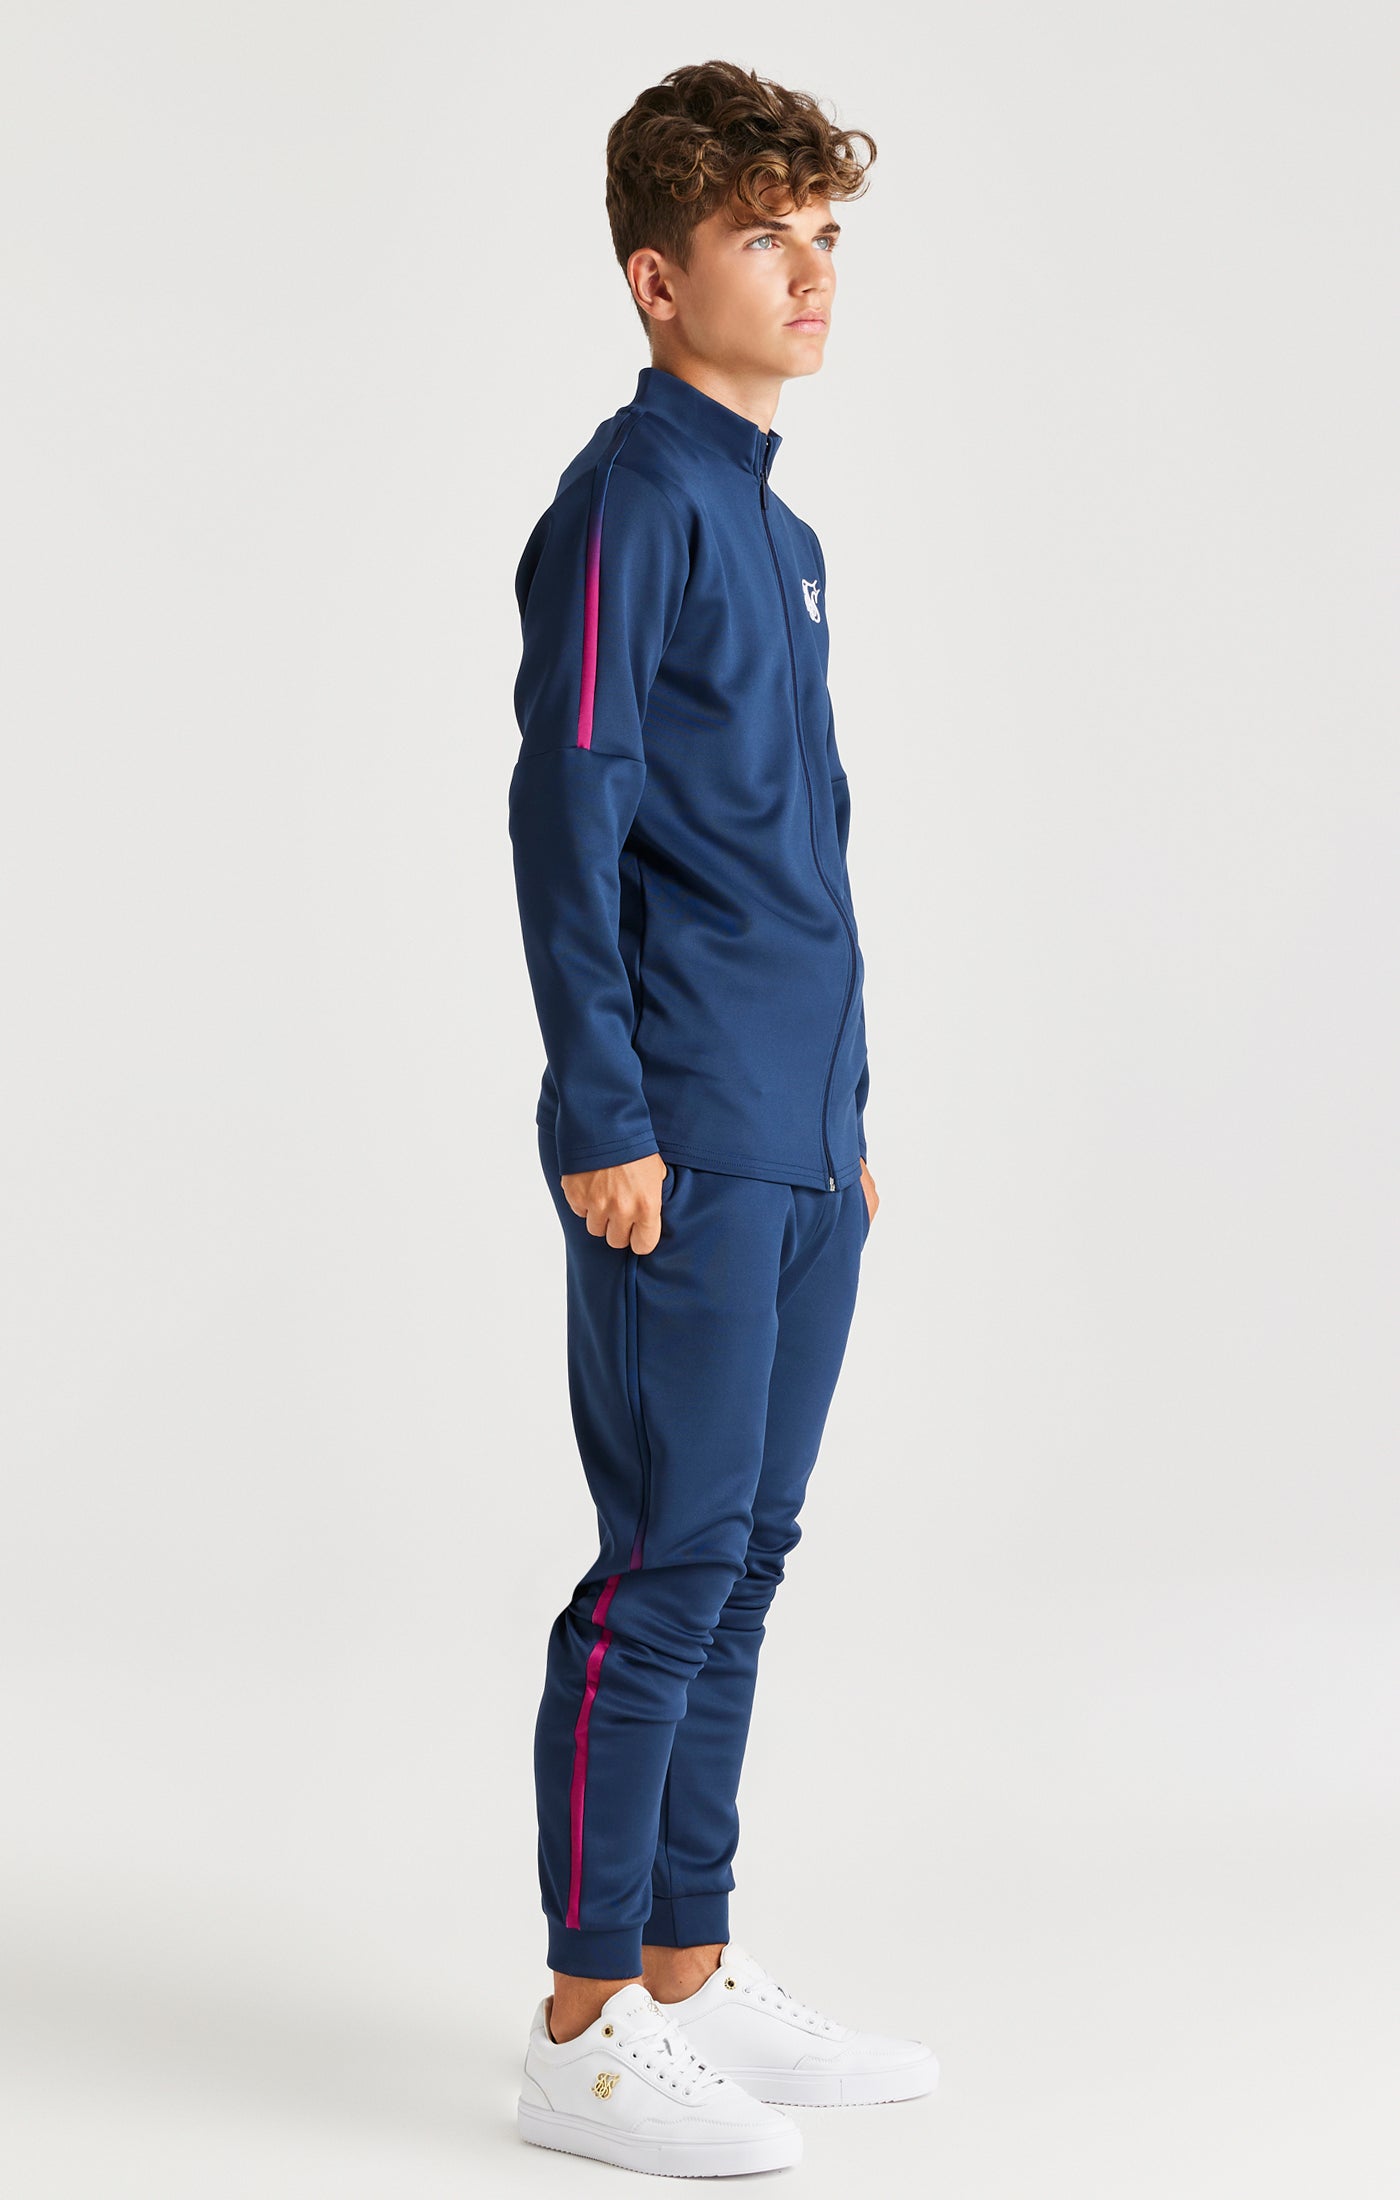 Load image into Gallery viewer, SikSilk Zonal Fade Track Top - Navy (3)